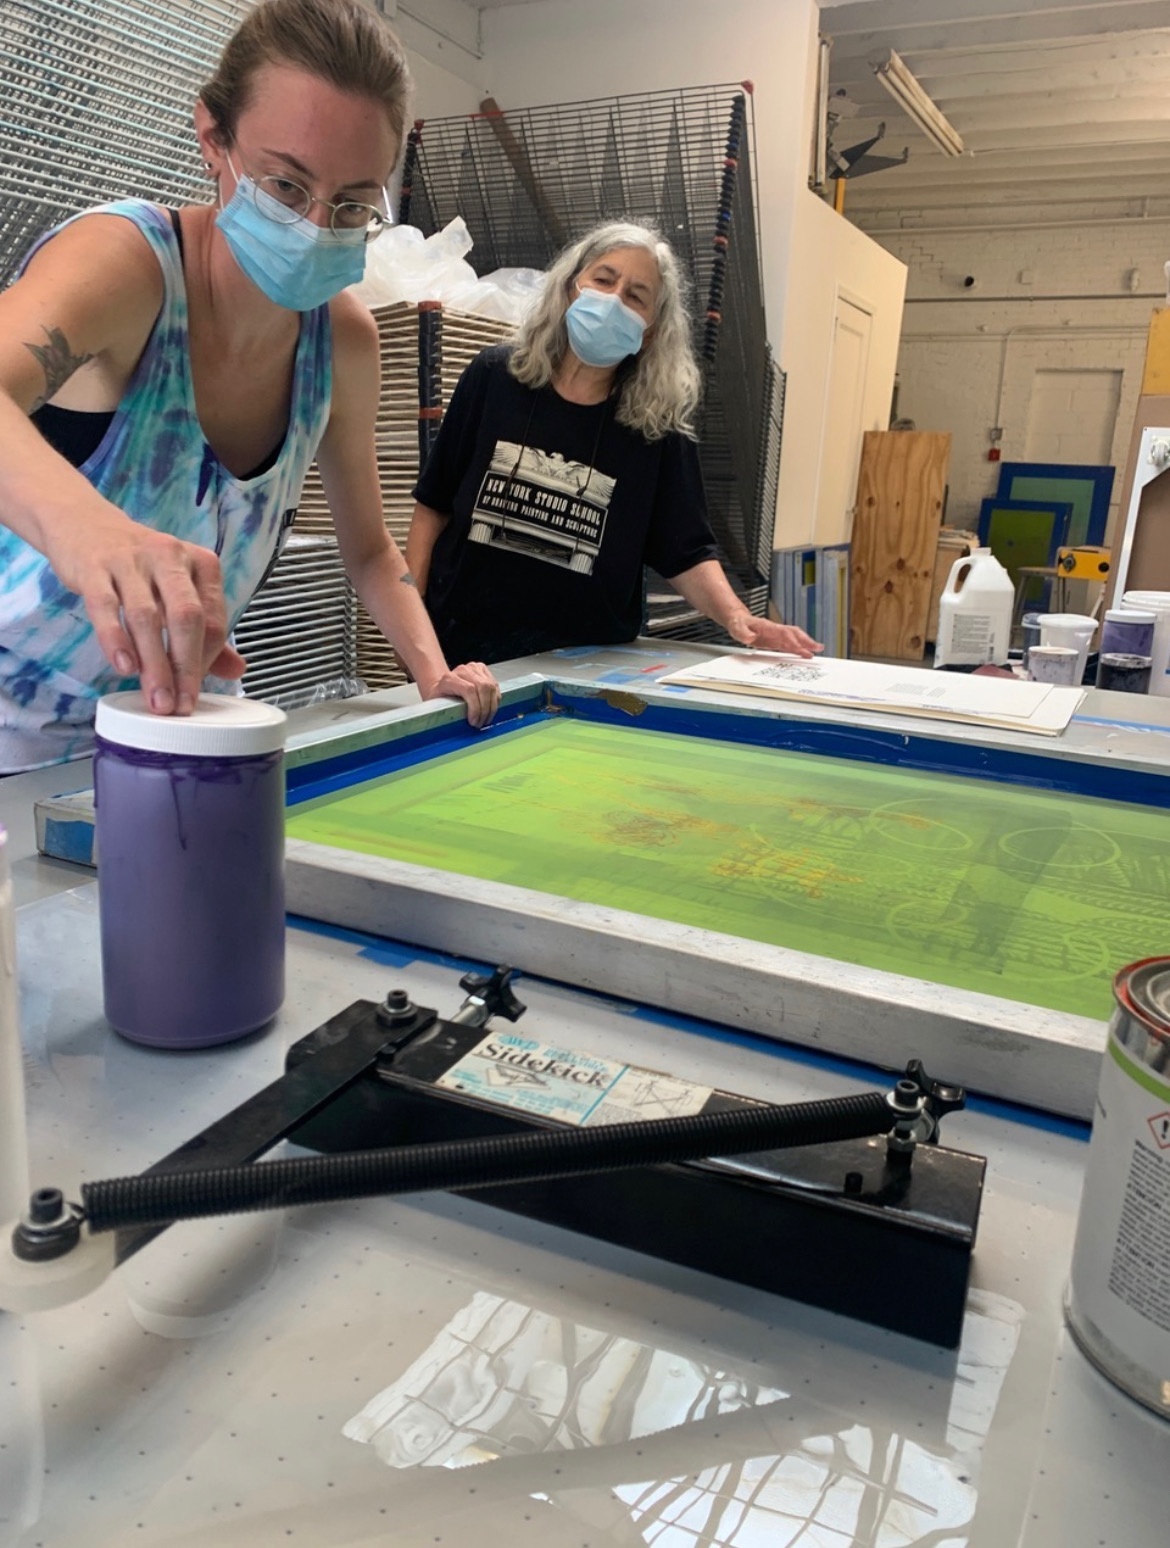 Production of “Flowers for TZK“ at Kingsland Printing, Brooklyn, NY, Amy Sillman and Sara Gates, 2020